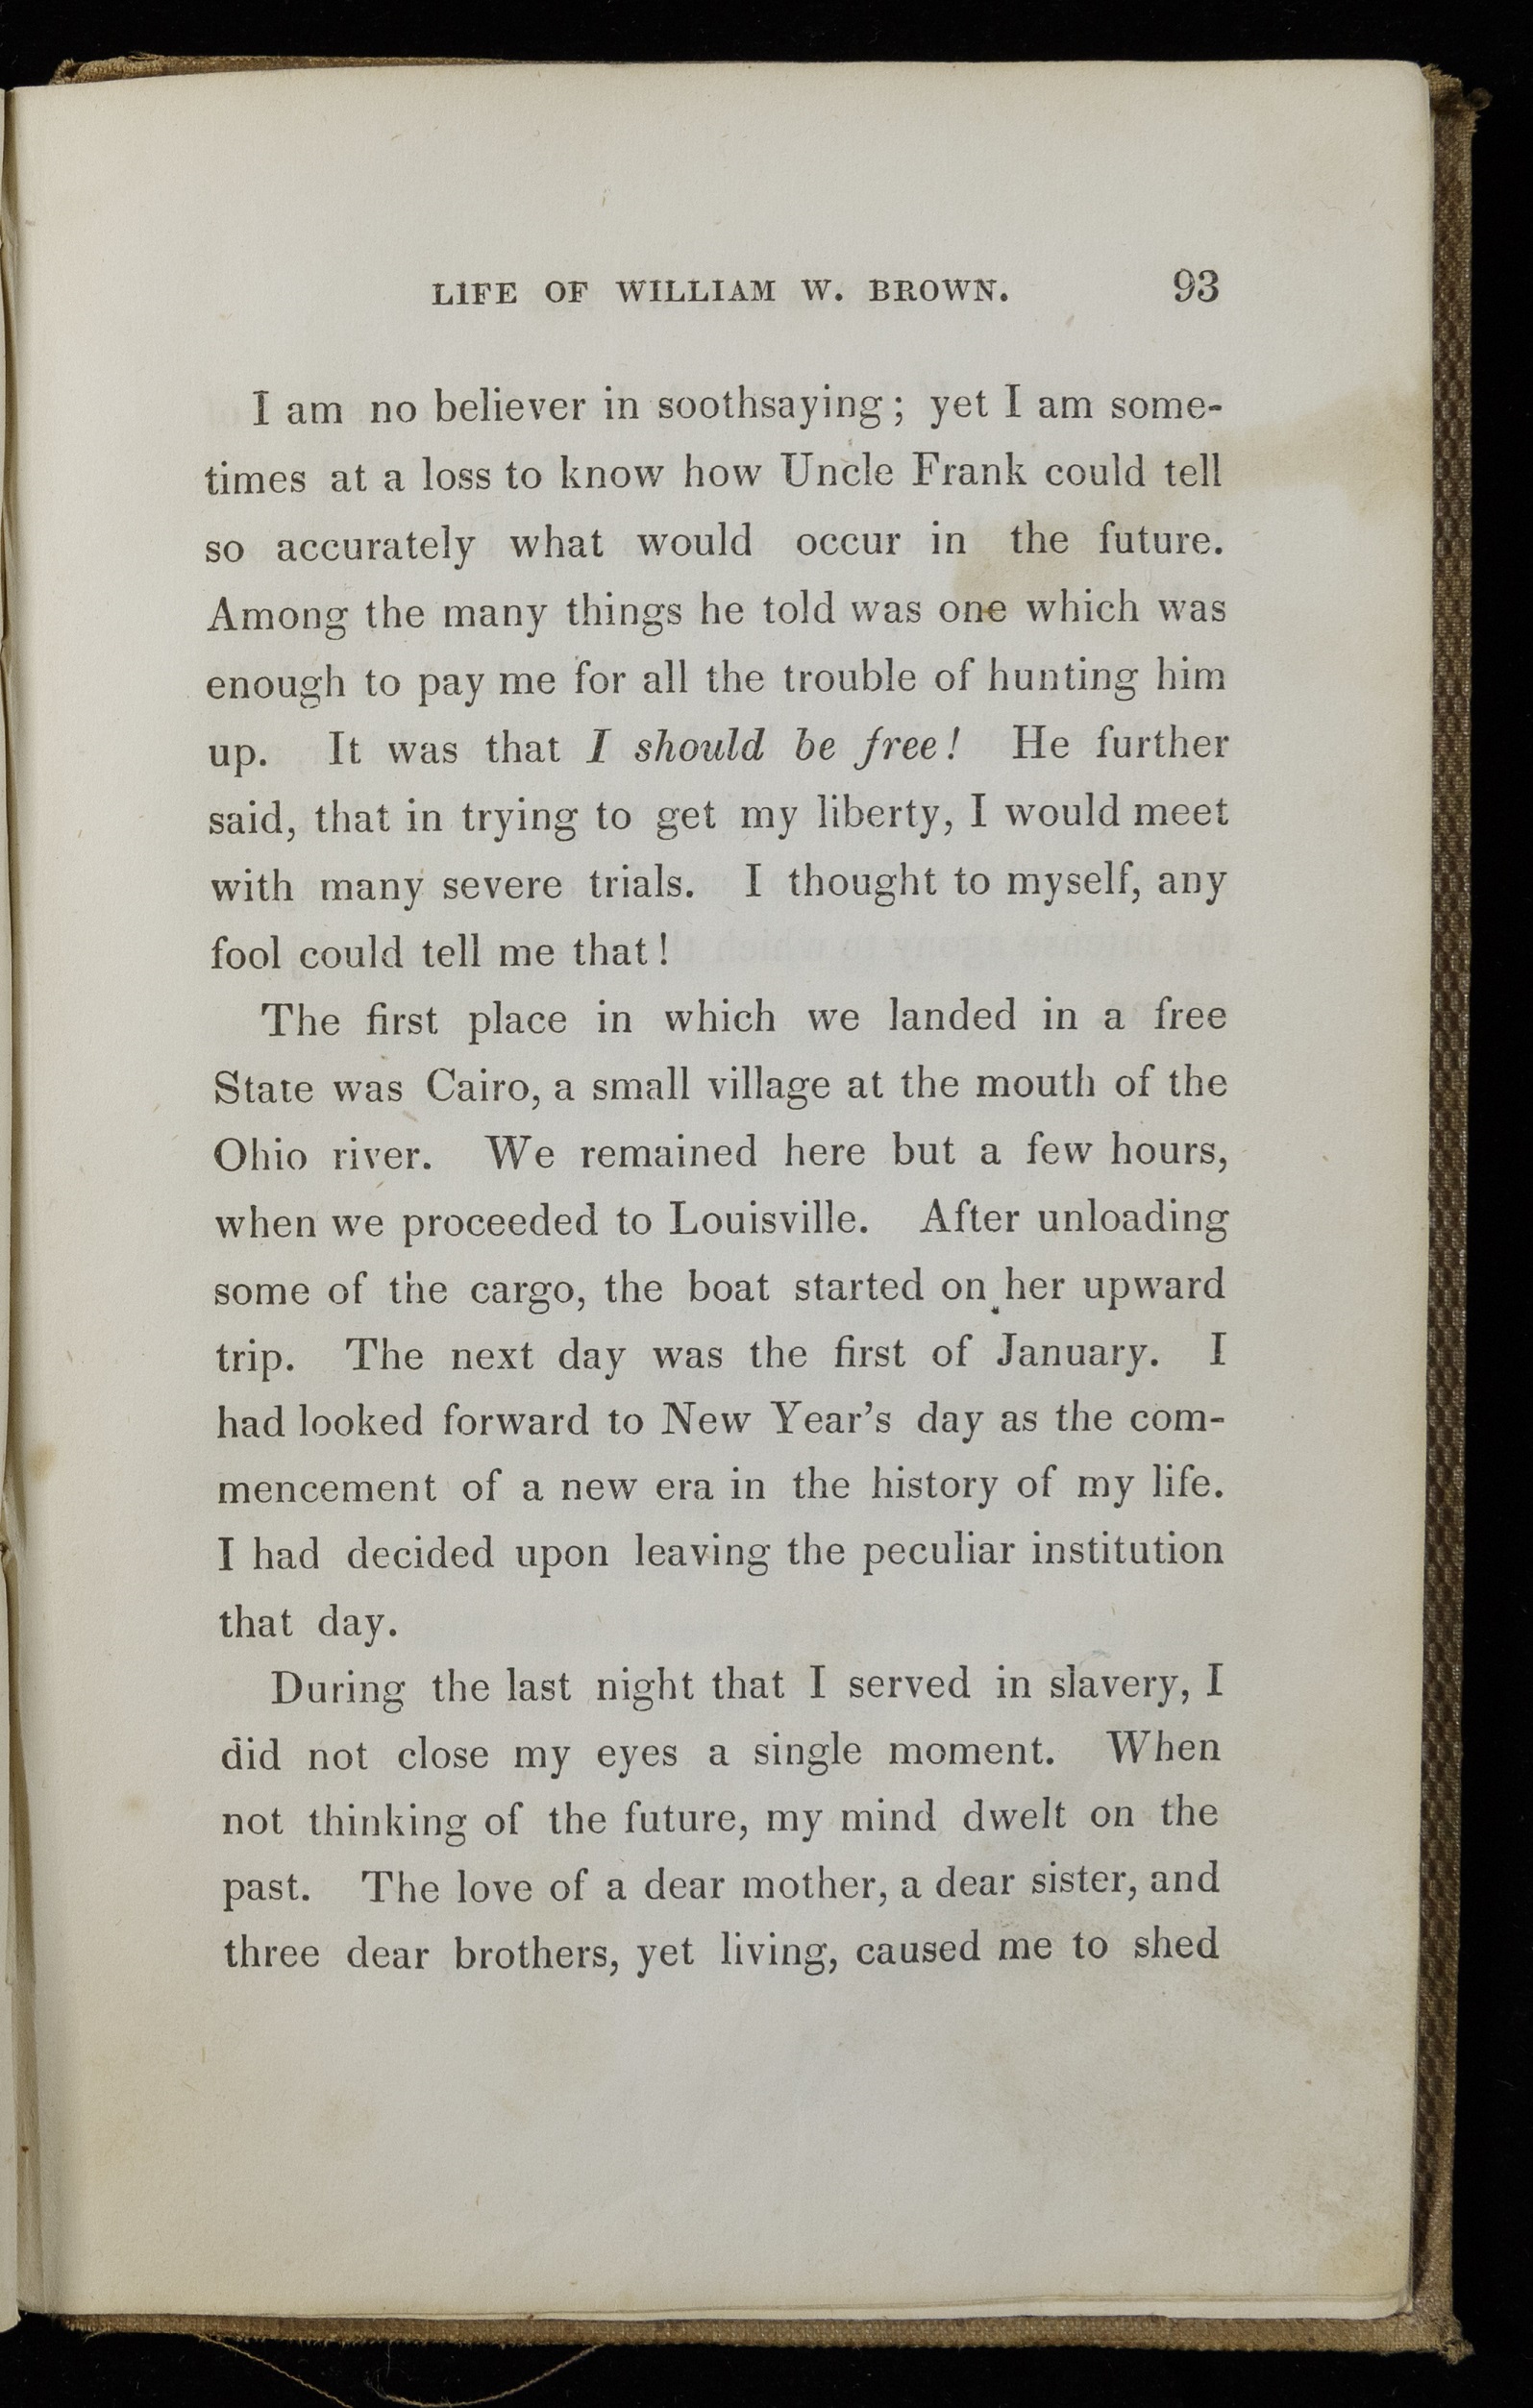 Page of printed text. Text reads, "I am no believer in soothsaying; yet I am sometimes at a loss to know how Uncle Frank could tell so accurately what would occur in the future. Among the many things we told me was one which was enough to pay me for all the trouble of hunting him up. It was that I should be free! He further said, that in trying to get my liberty, I would meet with many severe trials. I thought to myself, any fool could tell me that! The first place in which we landed in a free state was Cairo, a small village at the mouth of the Ohio river. We remained there but a few hours, when we proceeded to Louisville. After unloading some of the cargo, the boat started on her upward trip. The next day was the first of January. I had looked forward to a new era in the history of my life. I had decided upon leaving the peculiar institution that day. During the last night that I served in slavery, I did not close my eyes a single moment. When not thinking of the future, my mind dwelt on the past. The love of a dear mother, a dear sister, and three dear brothers, yet living, caused me to shed"